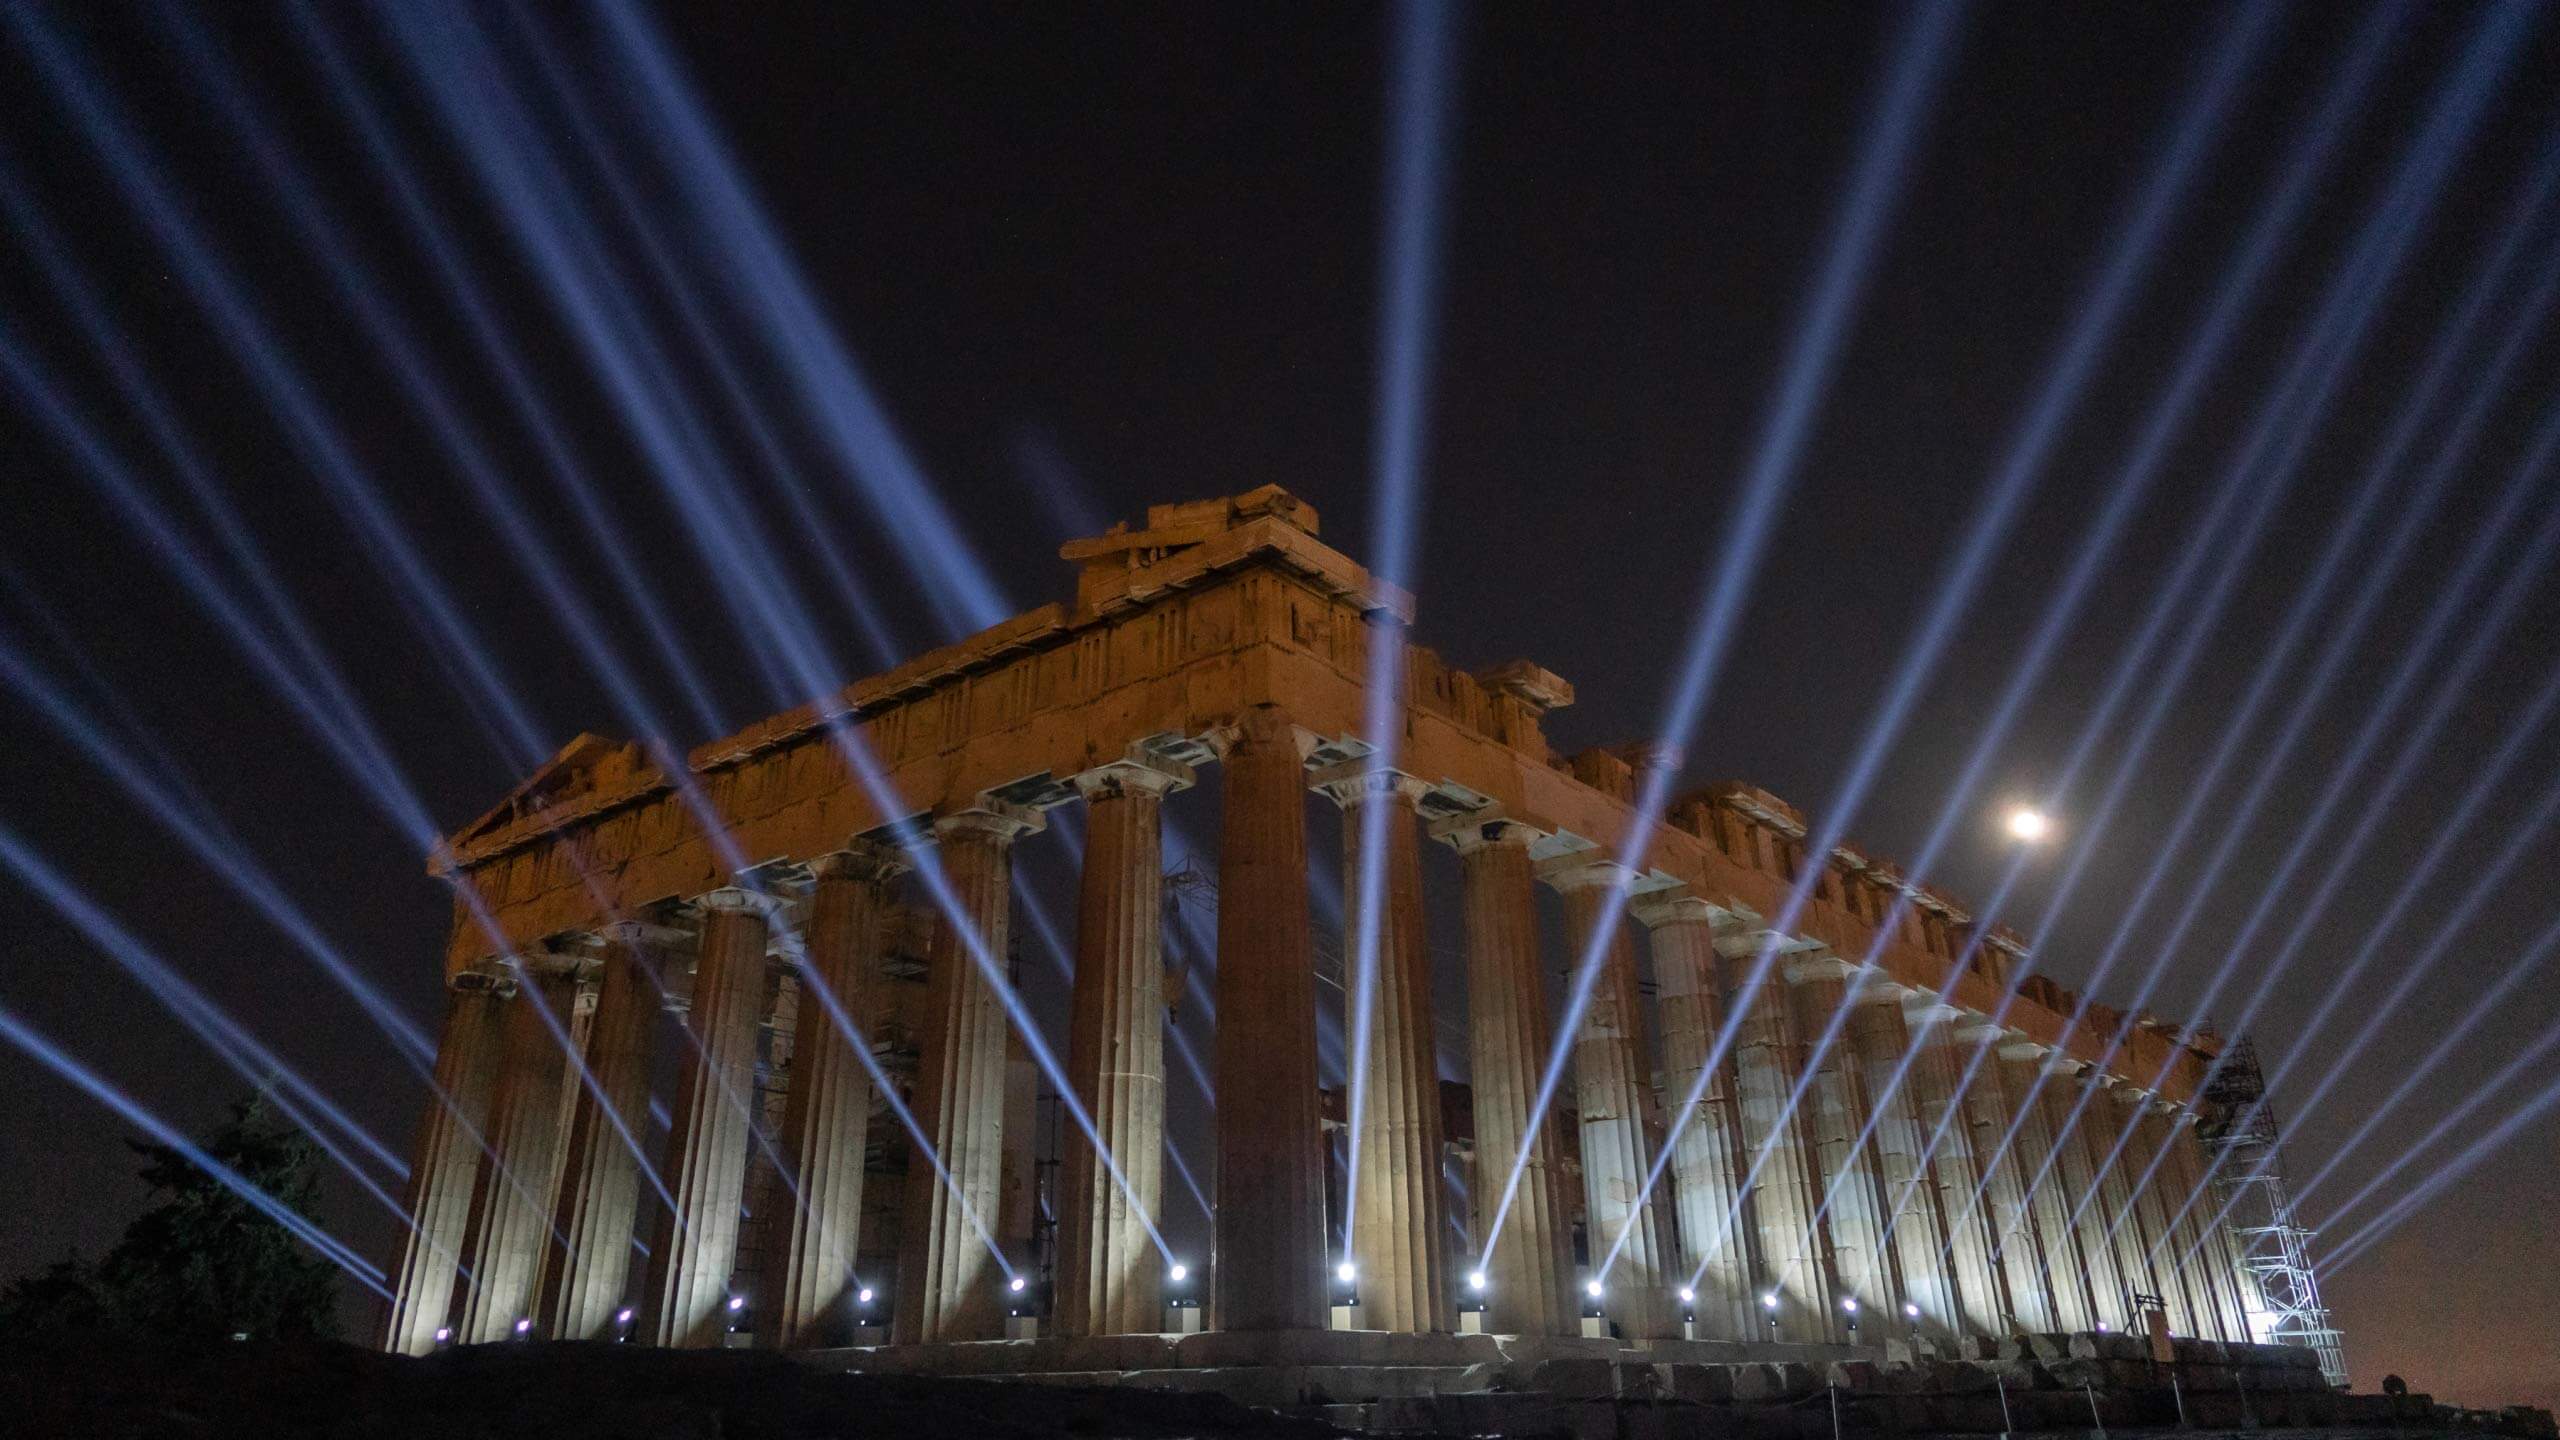 Presentation of the New Lighting of the Acropolis of Athens